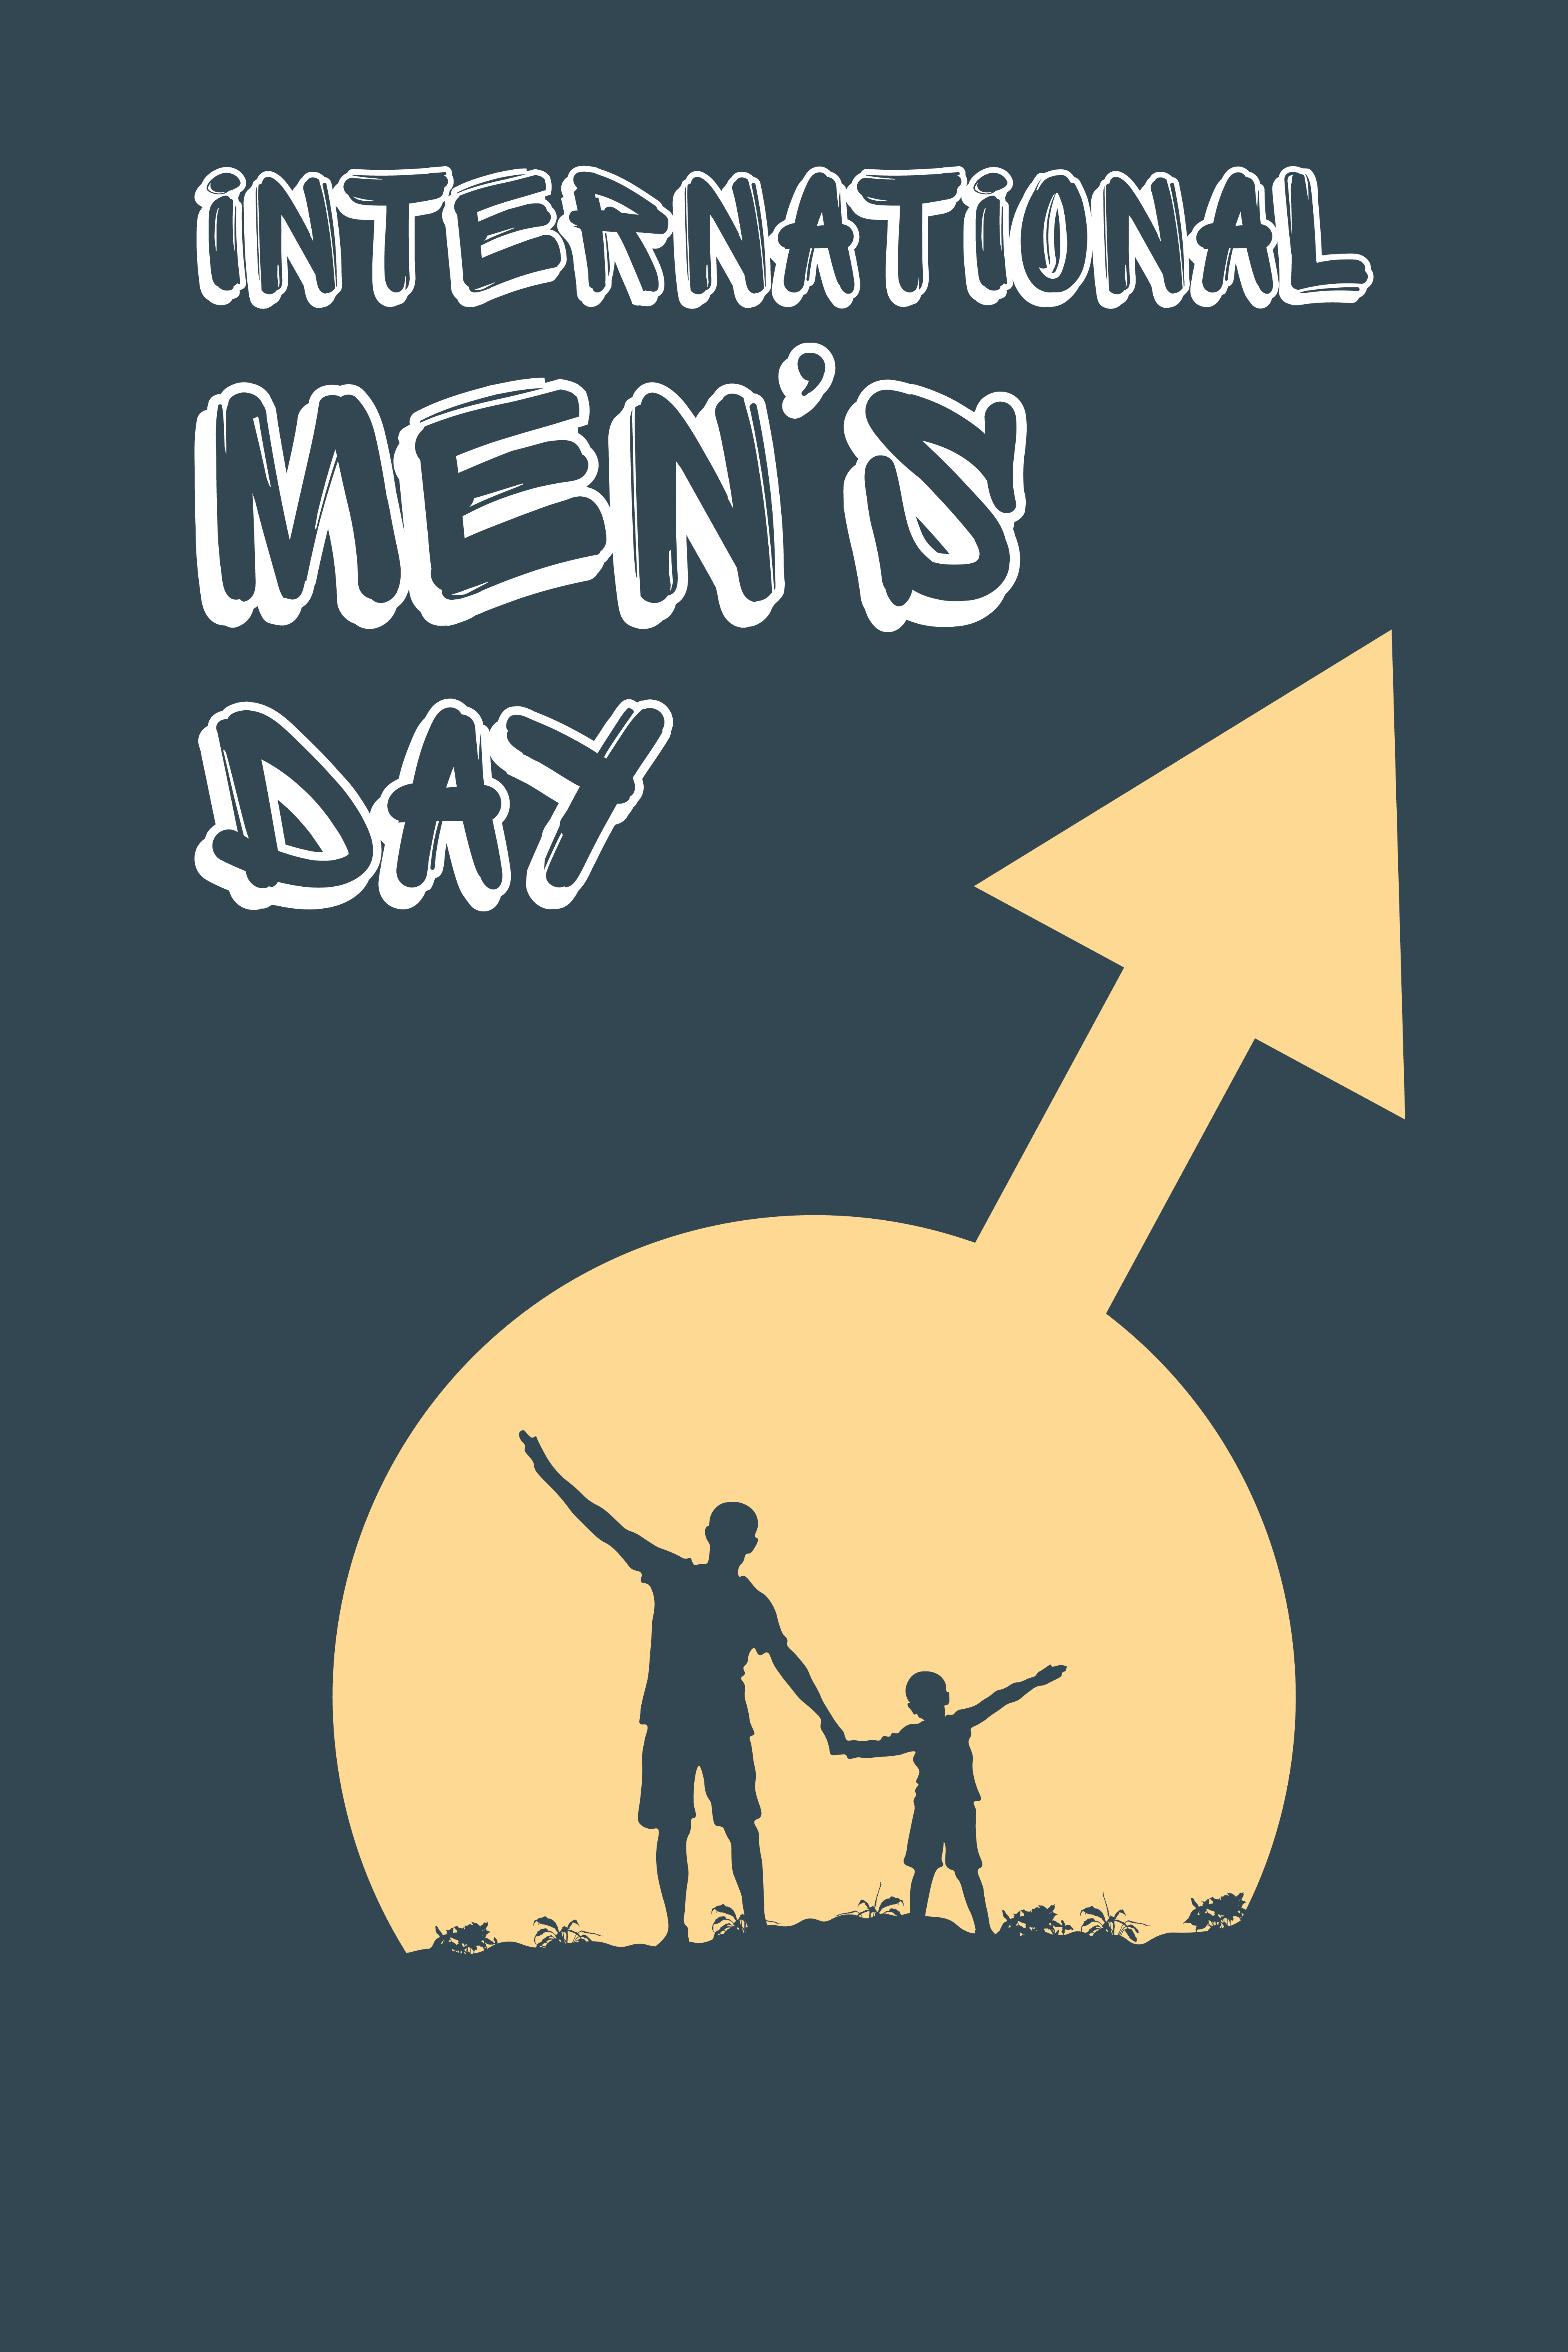 Happy International Men’s Day 2022 Best Wishes, Images, Quotes and